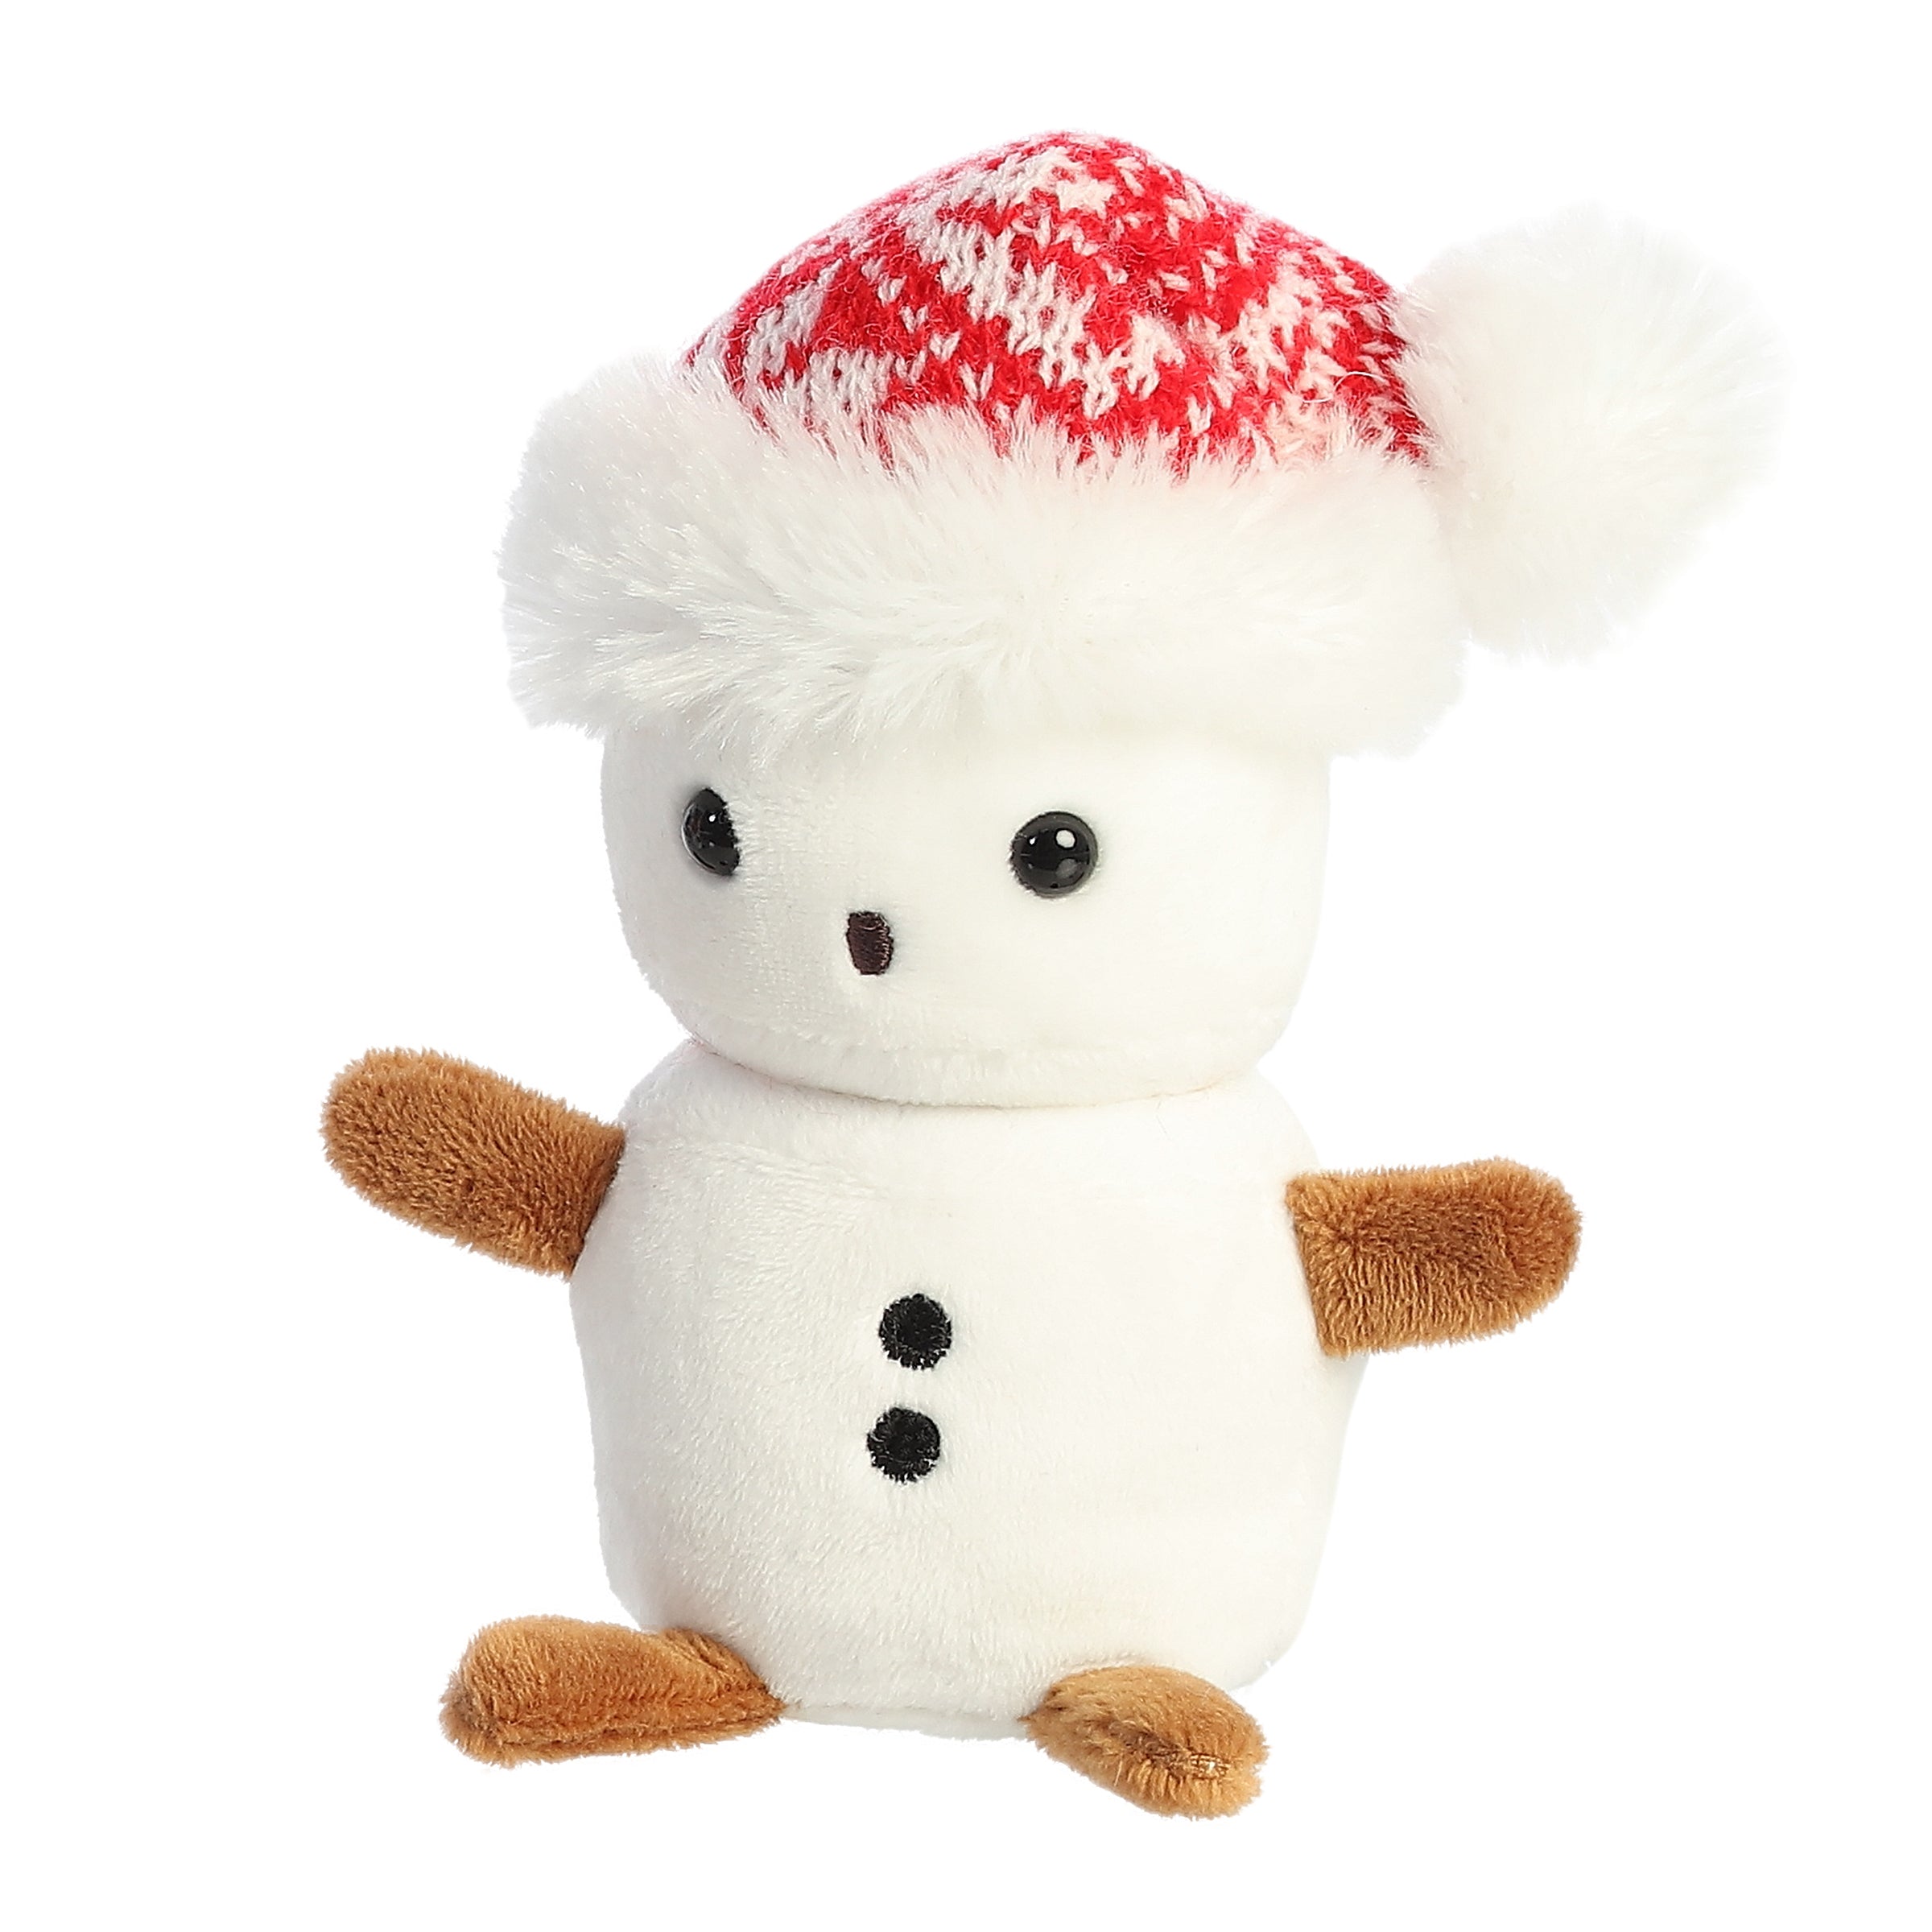 Snowflakes Sweater Penguin Holiday Plush (10 Tall)